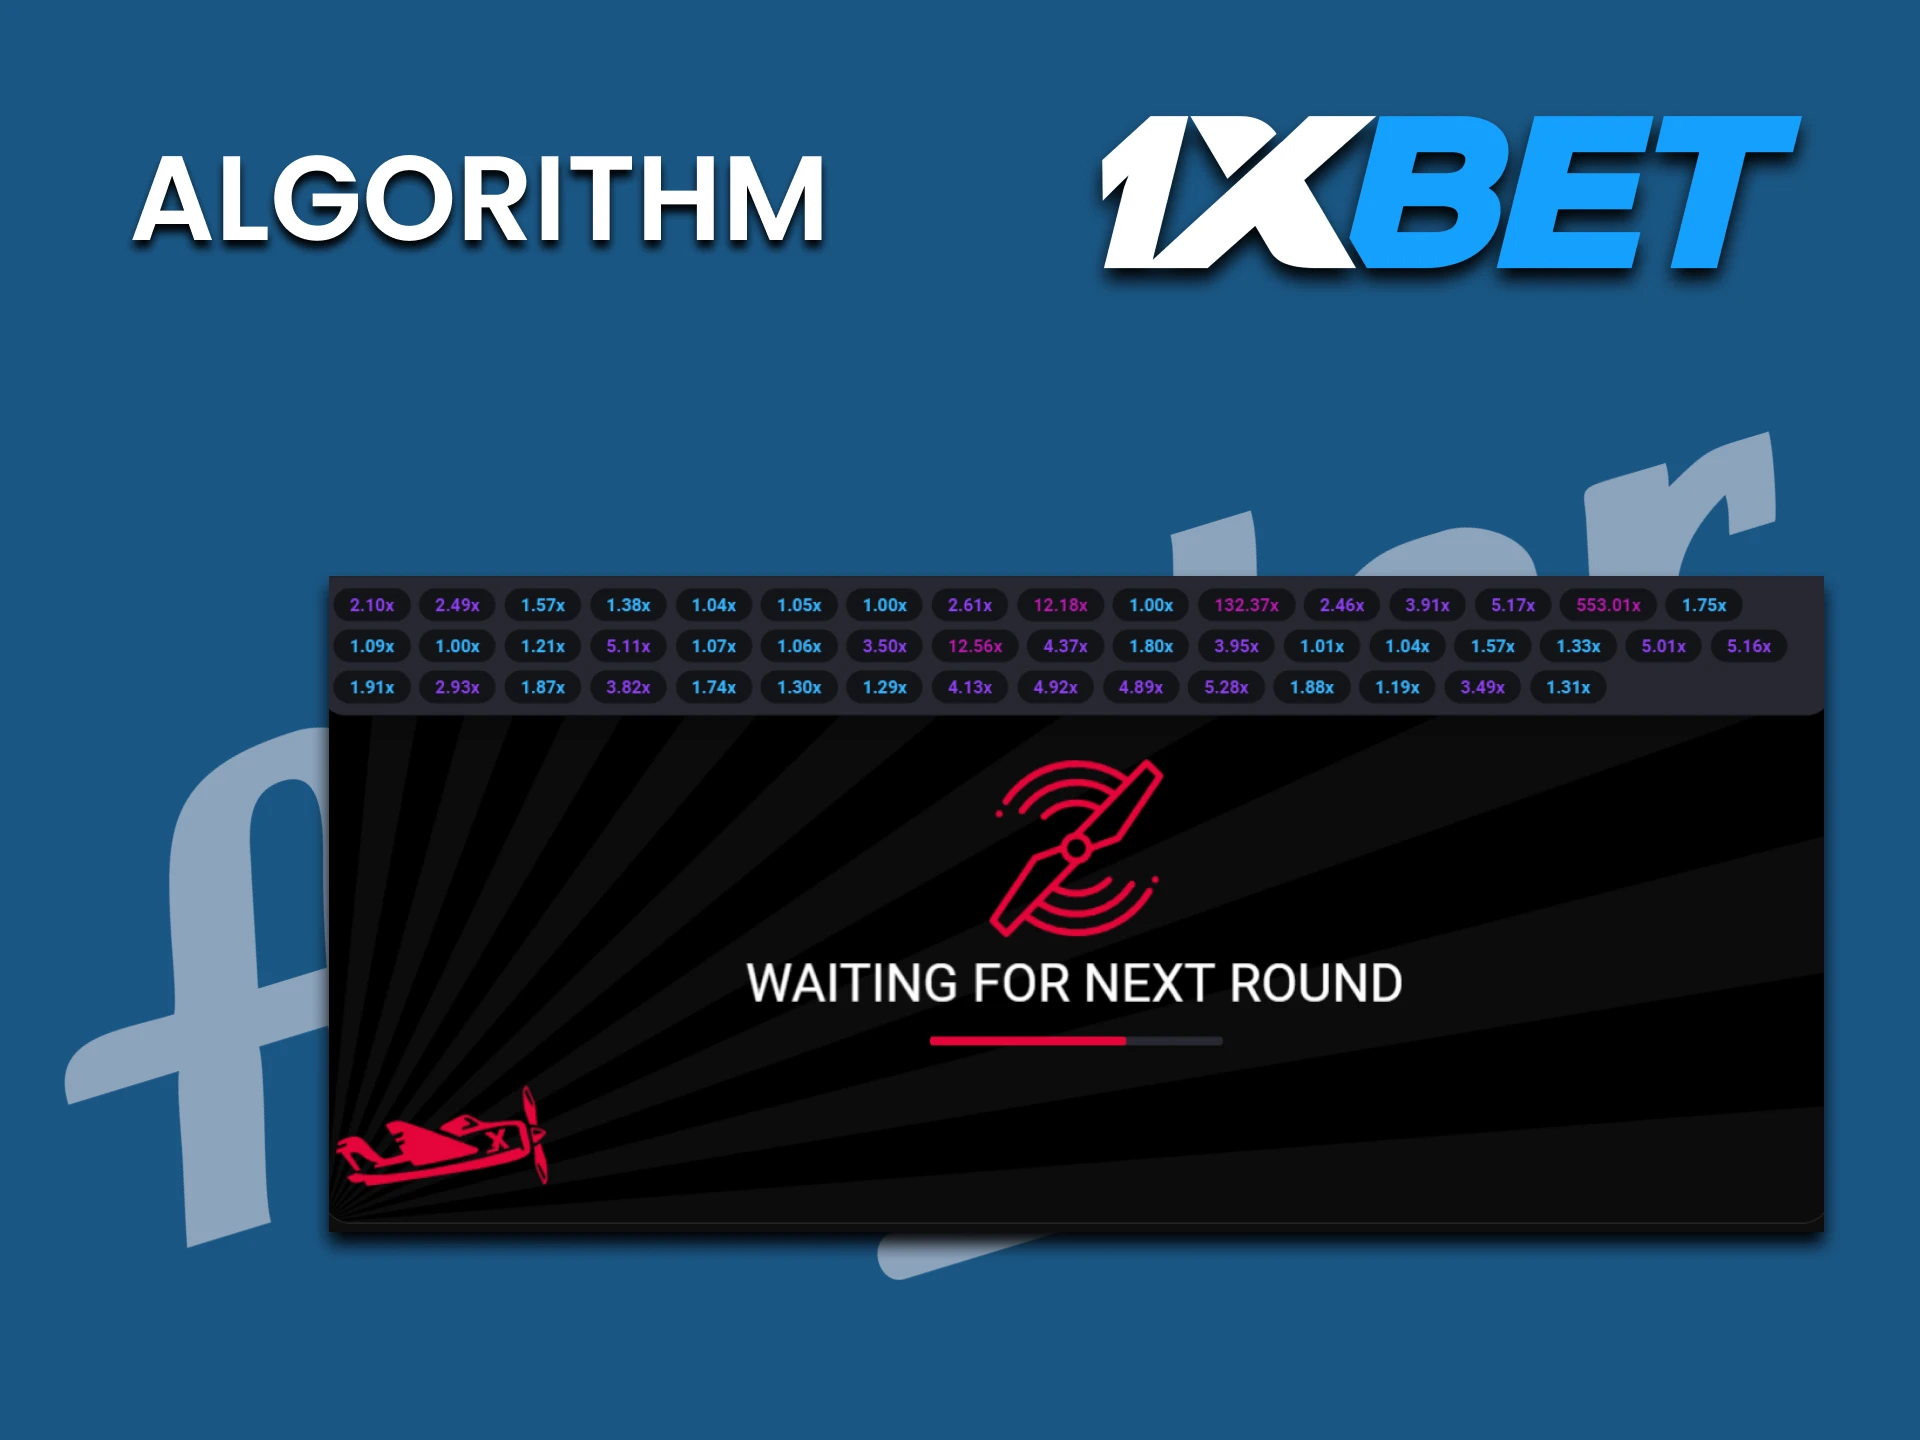 We will show you how the algorithm of the Aviator game on 1xbet is structured.